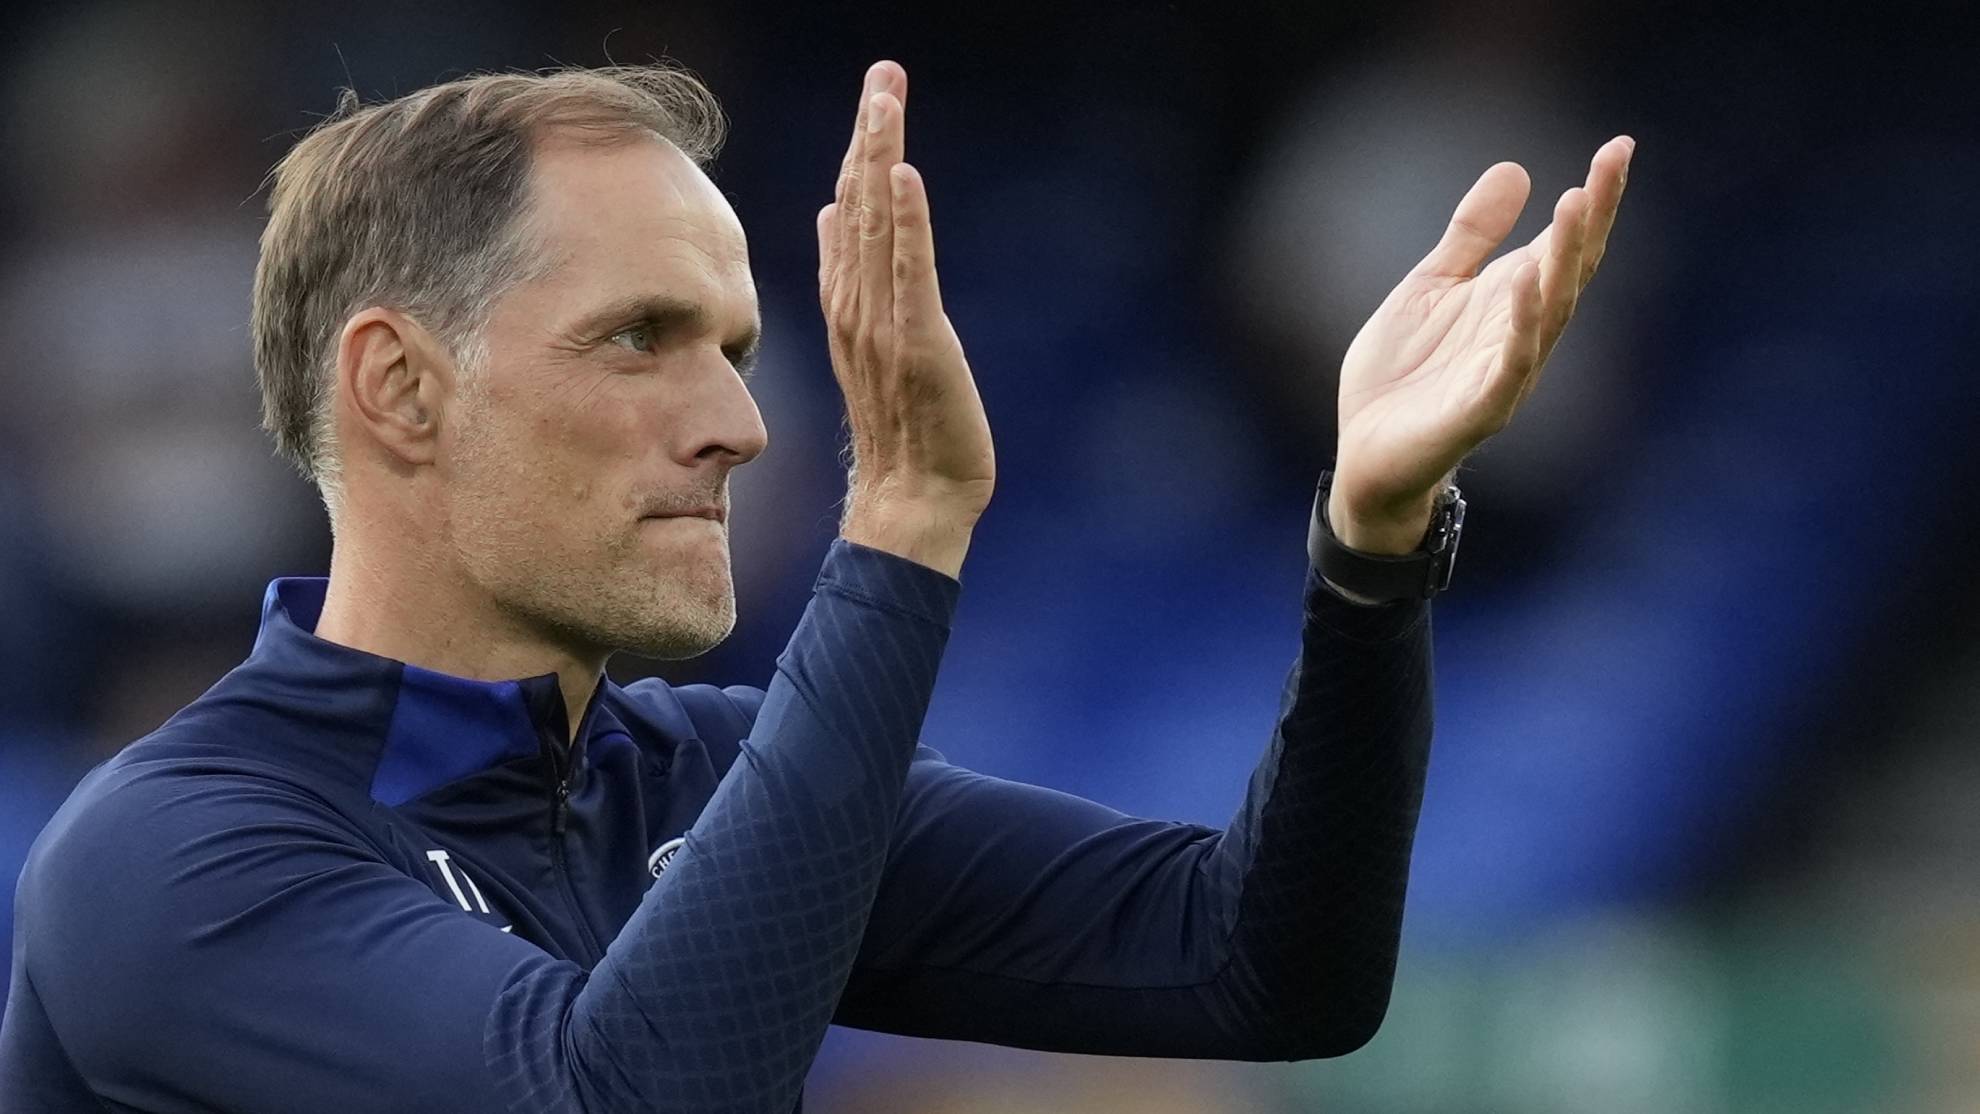 Tuchel: Its all about the win